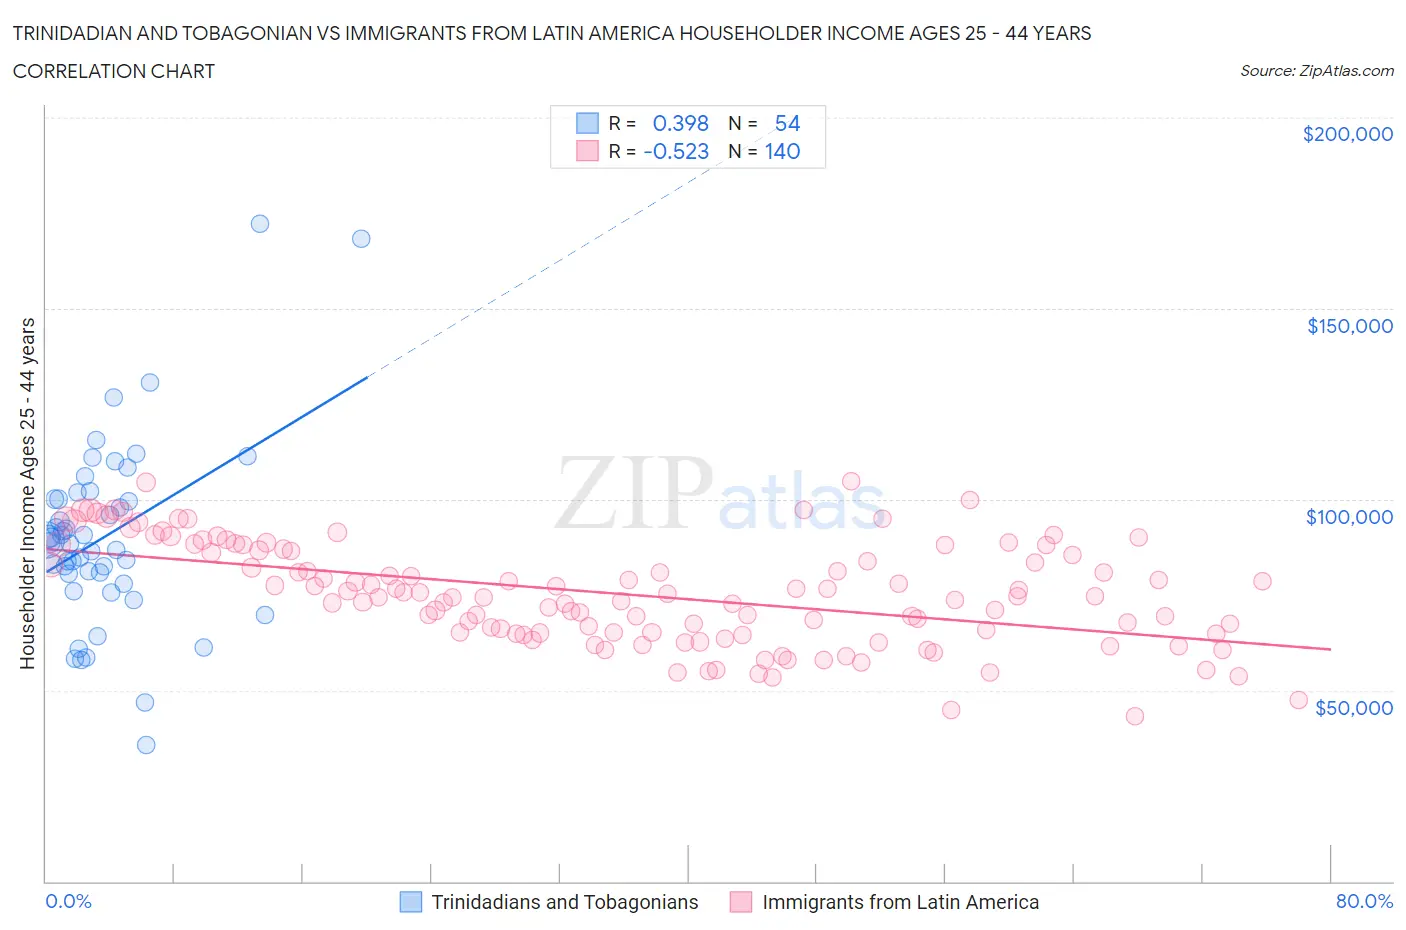 Trinidadian and Tobagonian vs Immigrants from Latin America Householder Income Ages 25 - 44 years